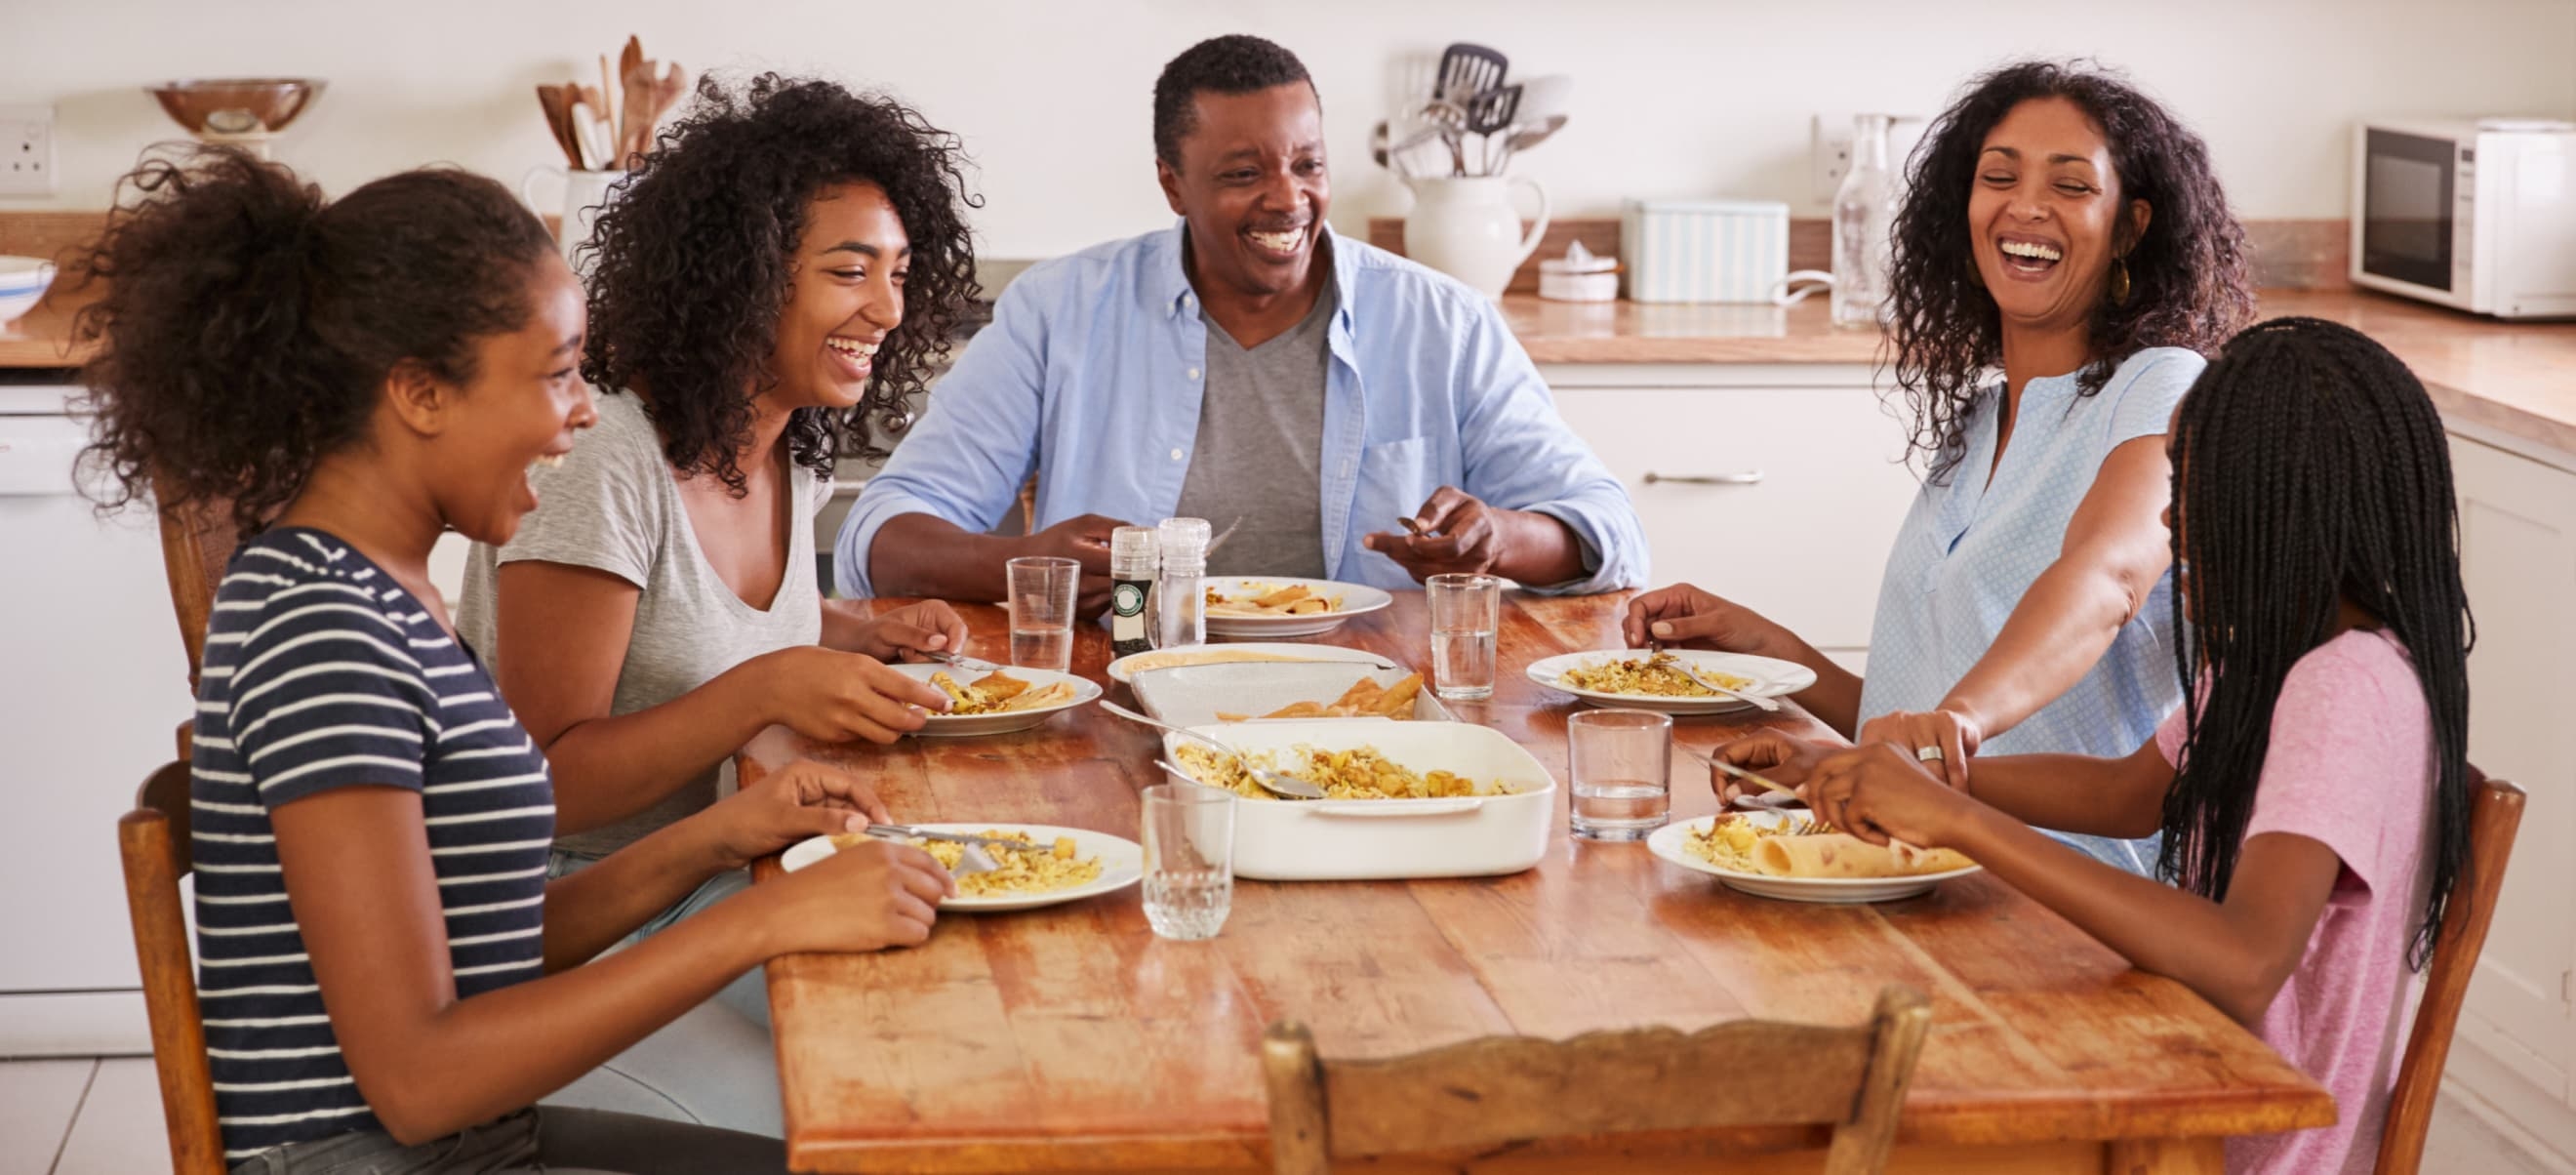 A family of five sits around a wooden dining table, laughing and eating a meal together in a bright kitchen, offering a perfect case study of joyful, everyday moments enhanced by the McCormick app.